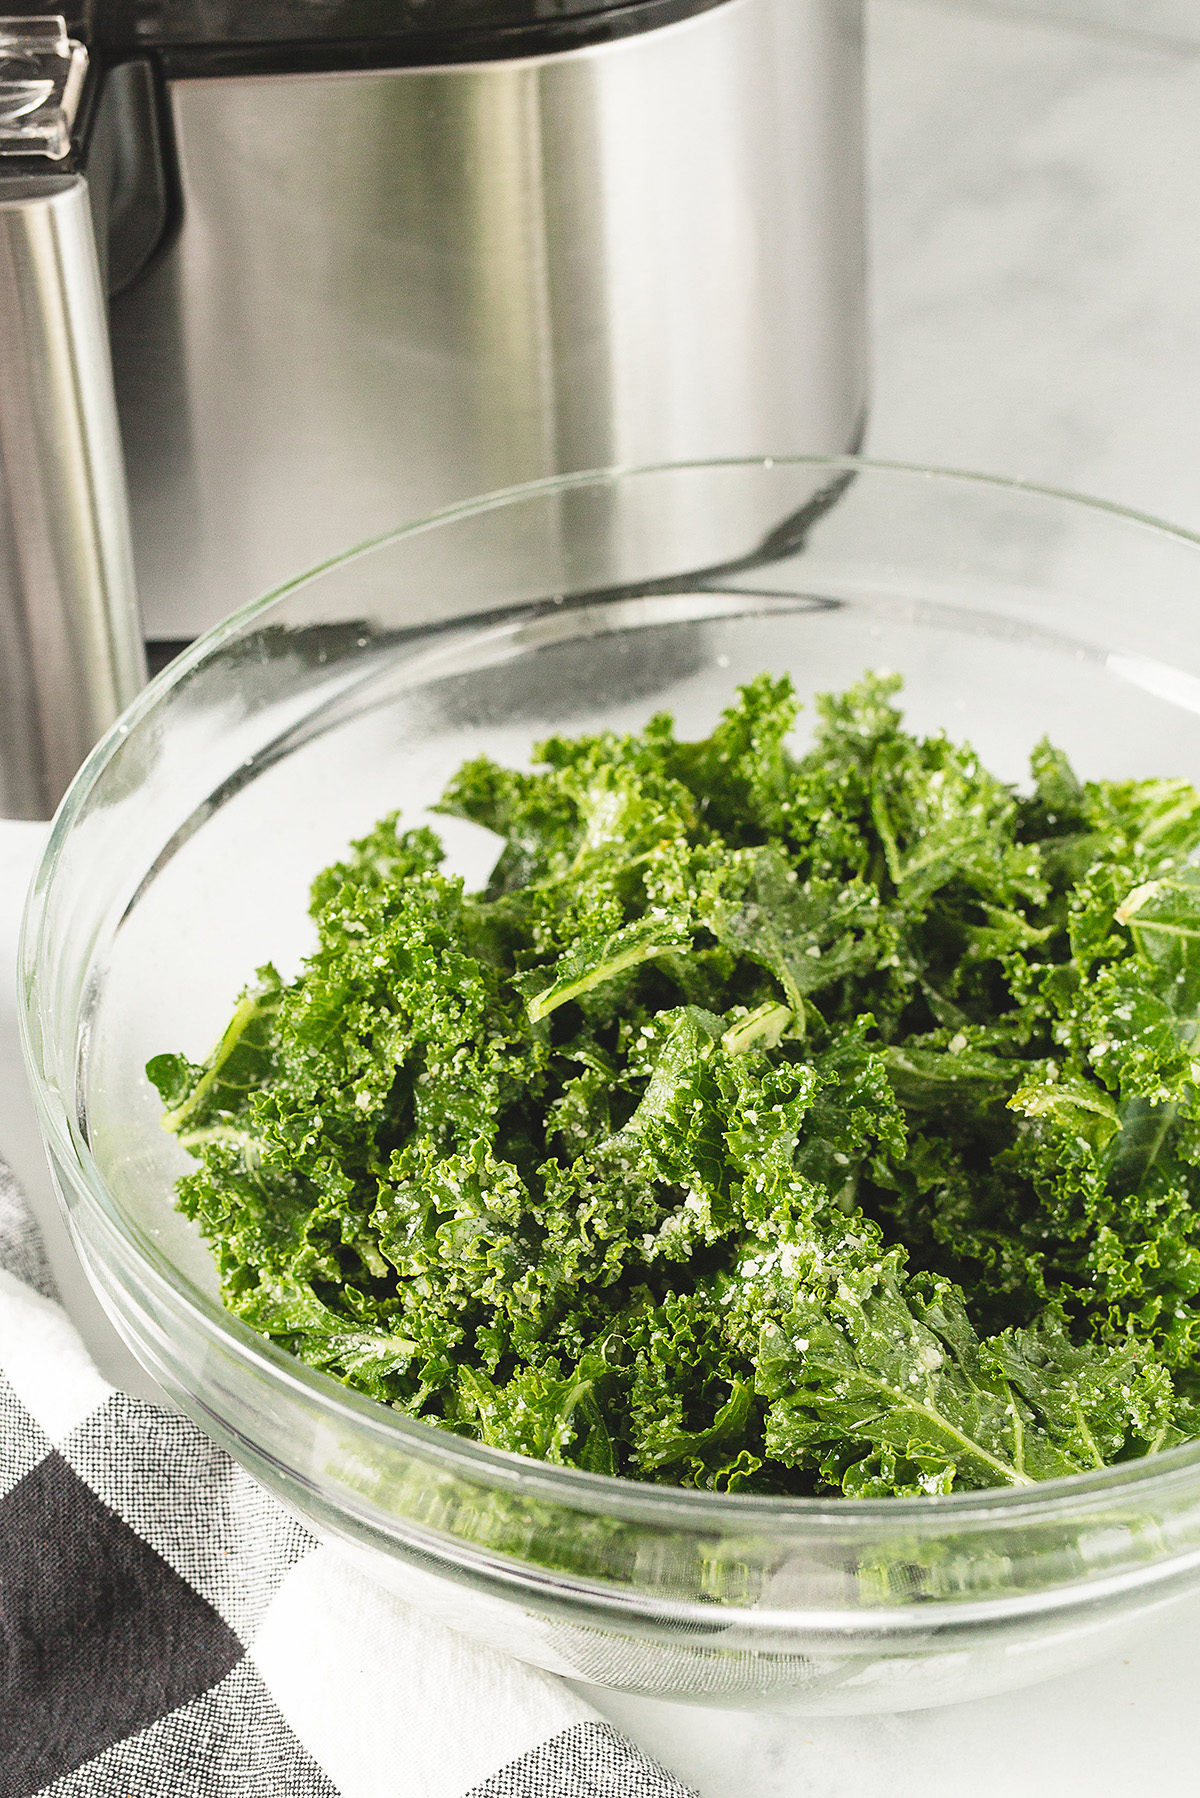 Washed kale in a clear glass bowl